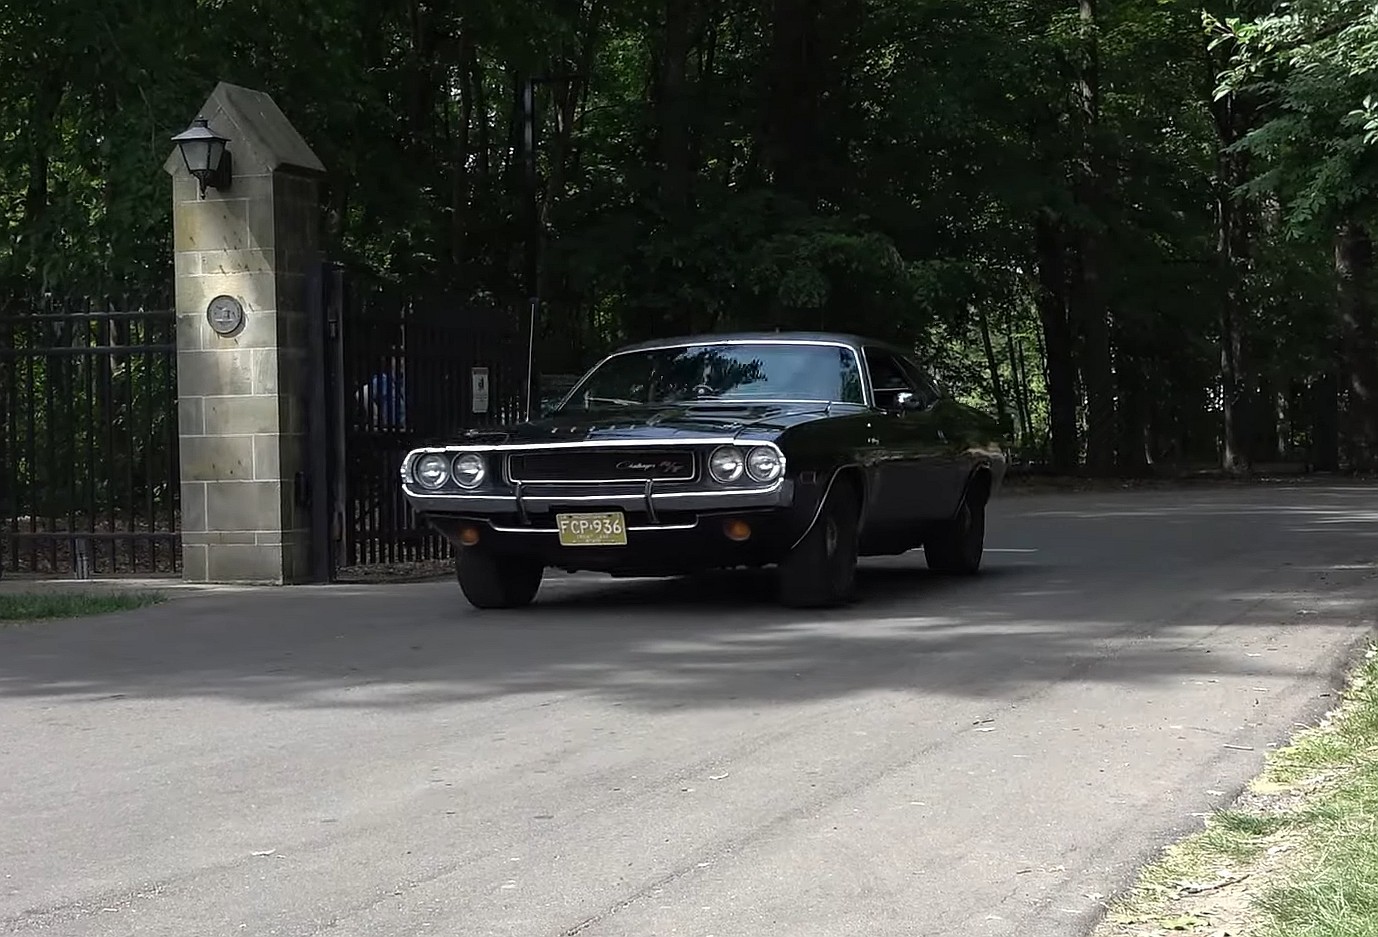 Infamous 1970 Dodge Challenger Black Ghost Shows Up at Car Show